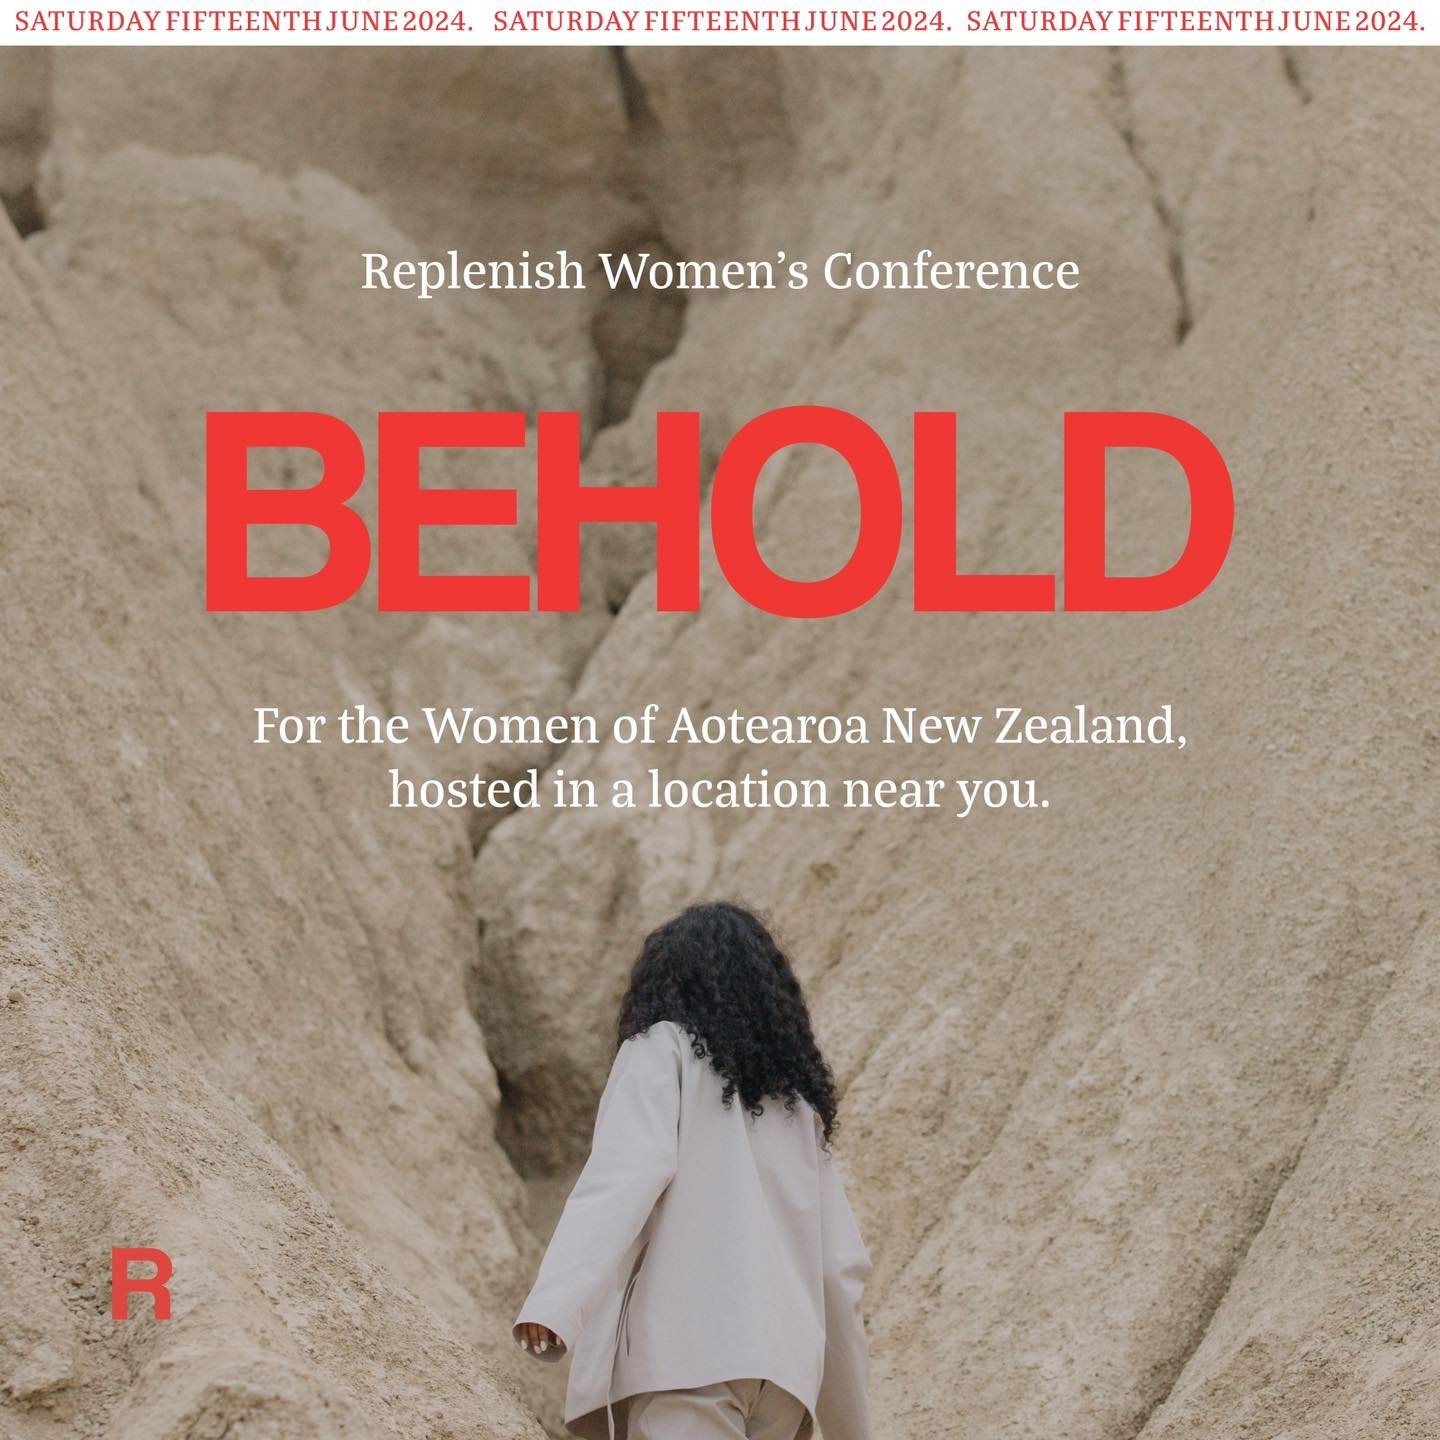 REPLENISH WOMENS CONFERENCE 2024

We are so excited to be hosting ladies from all around Aotearoa New Zealand for Replenish conference this year.

Ladies, bring your friends and join us for a fun day out, filled with laughter, inspiration, special mo